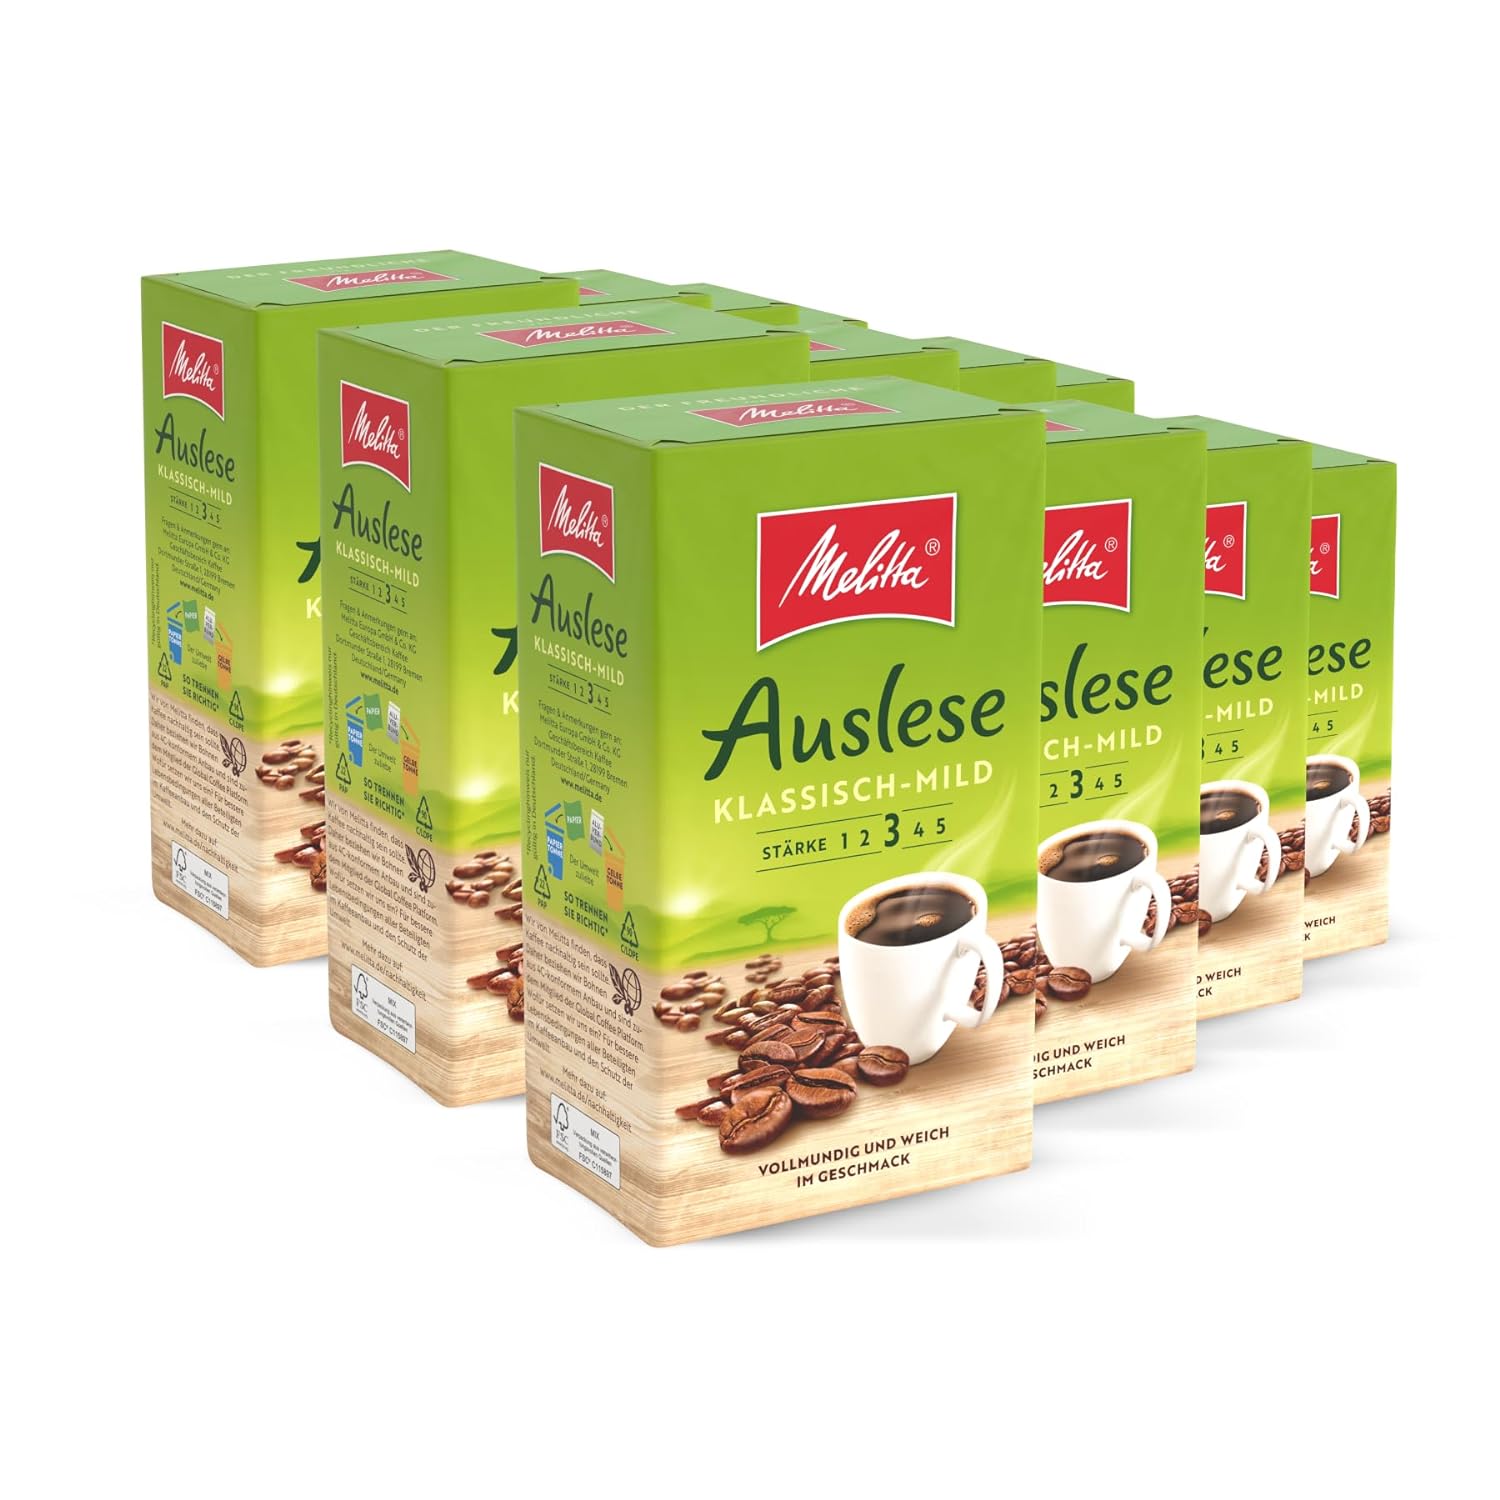 Melitta Auslese Classic Mild Filter Coffee 12 x 500 g, Ground, Powder for Filter Coffee Machines, Medium Roasting, Roasted in Germany, in Tray